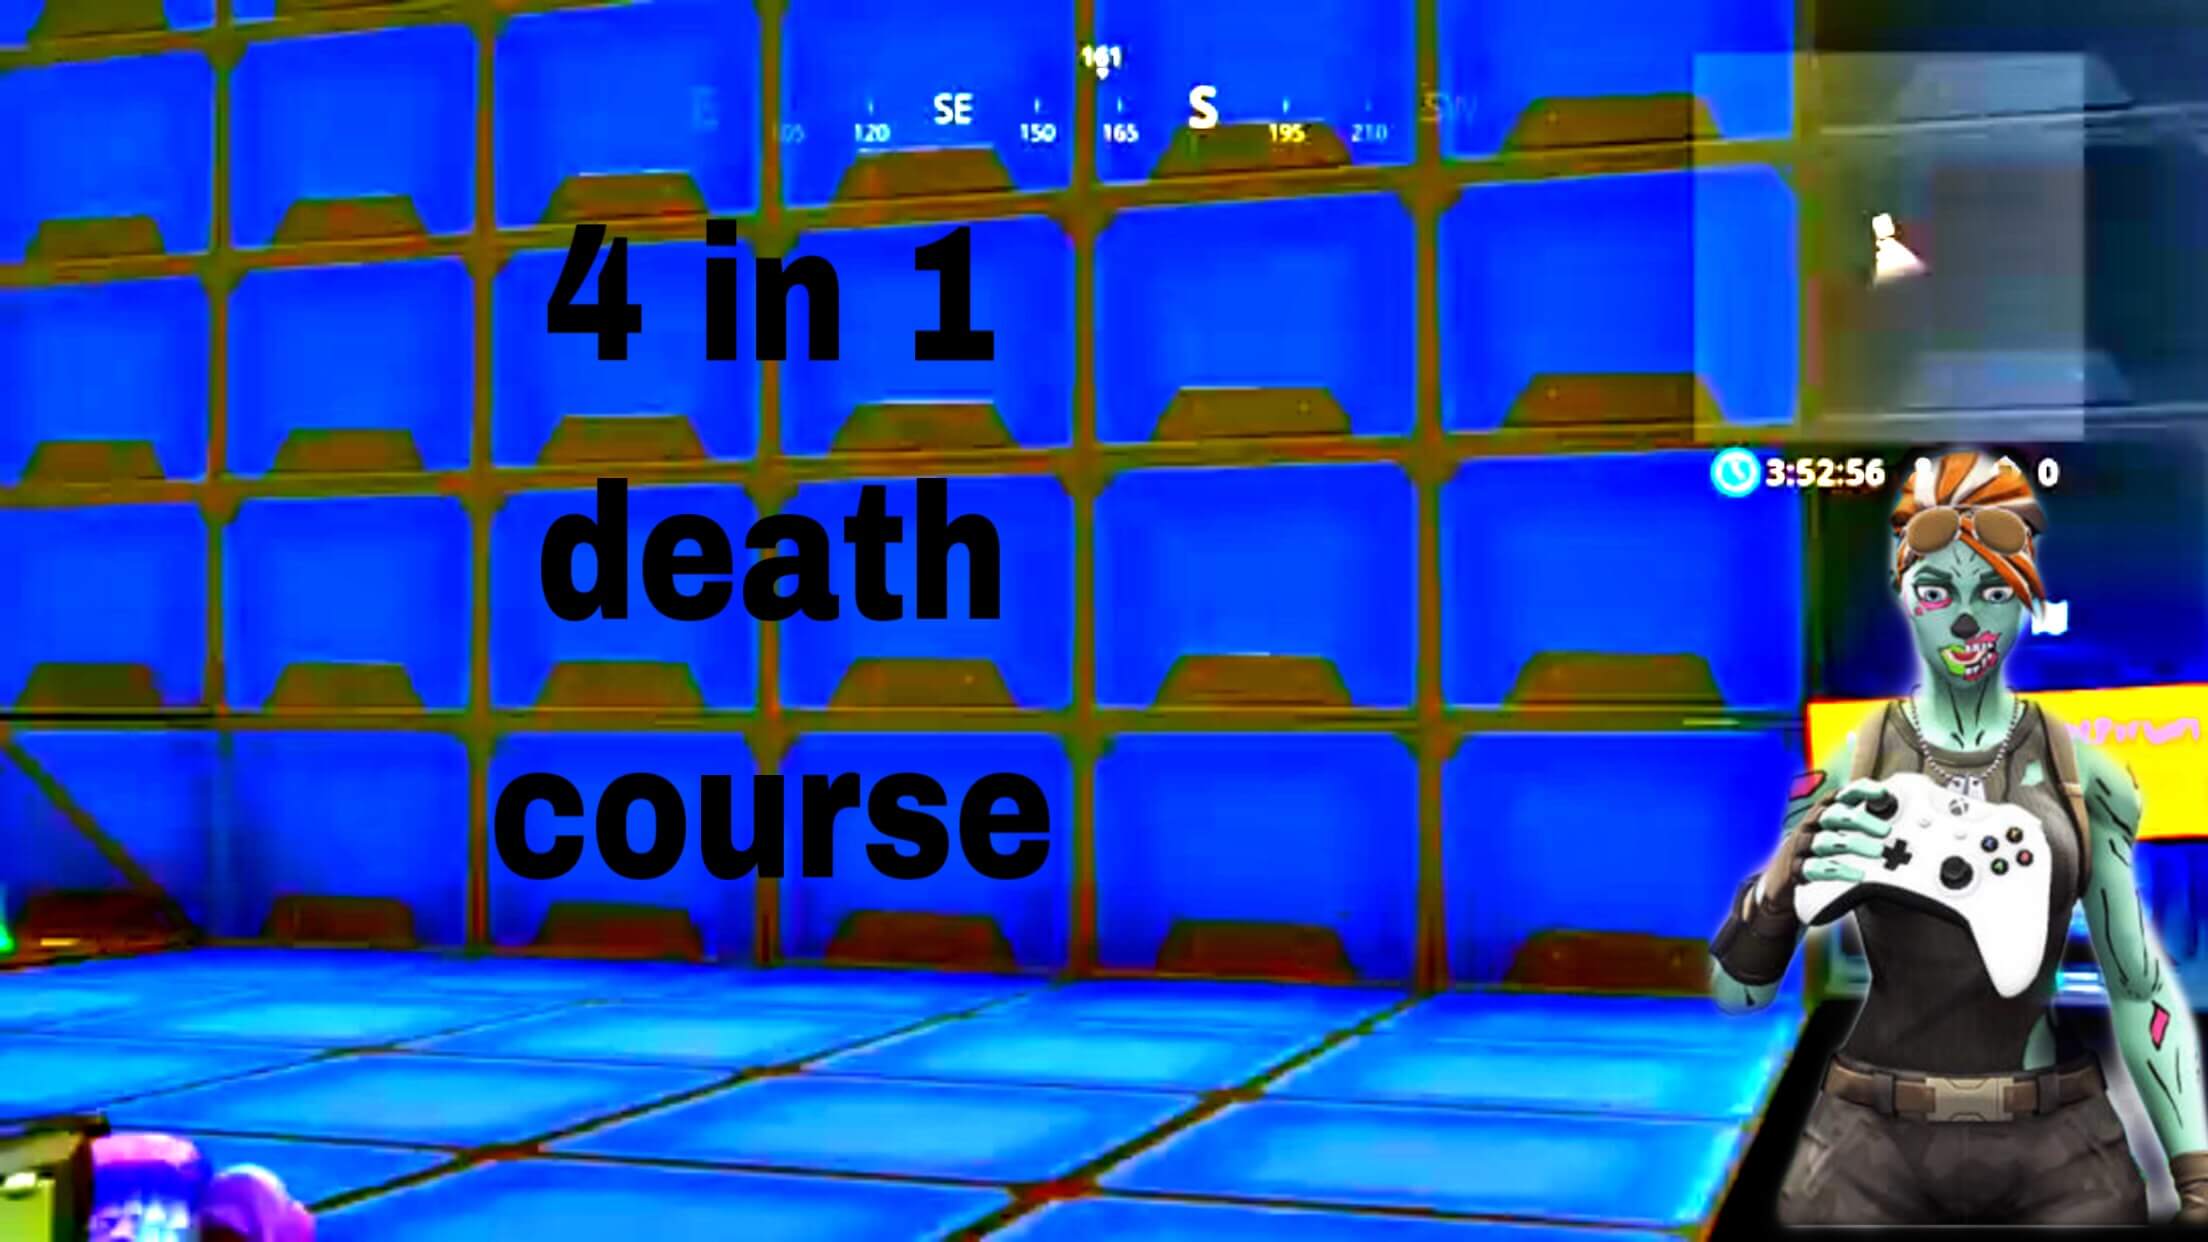 4 IN 1 DEATH COURSE